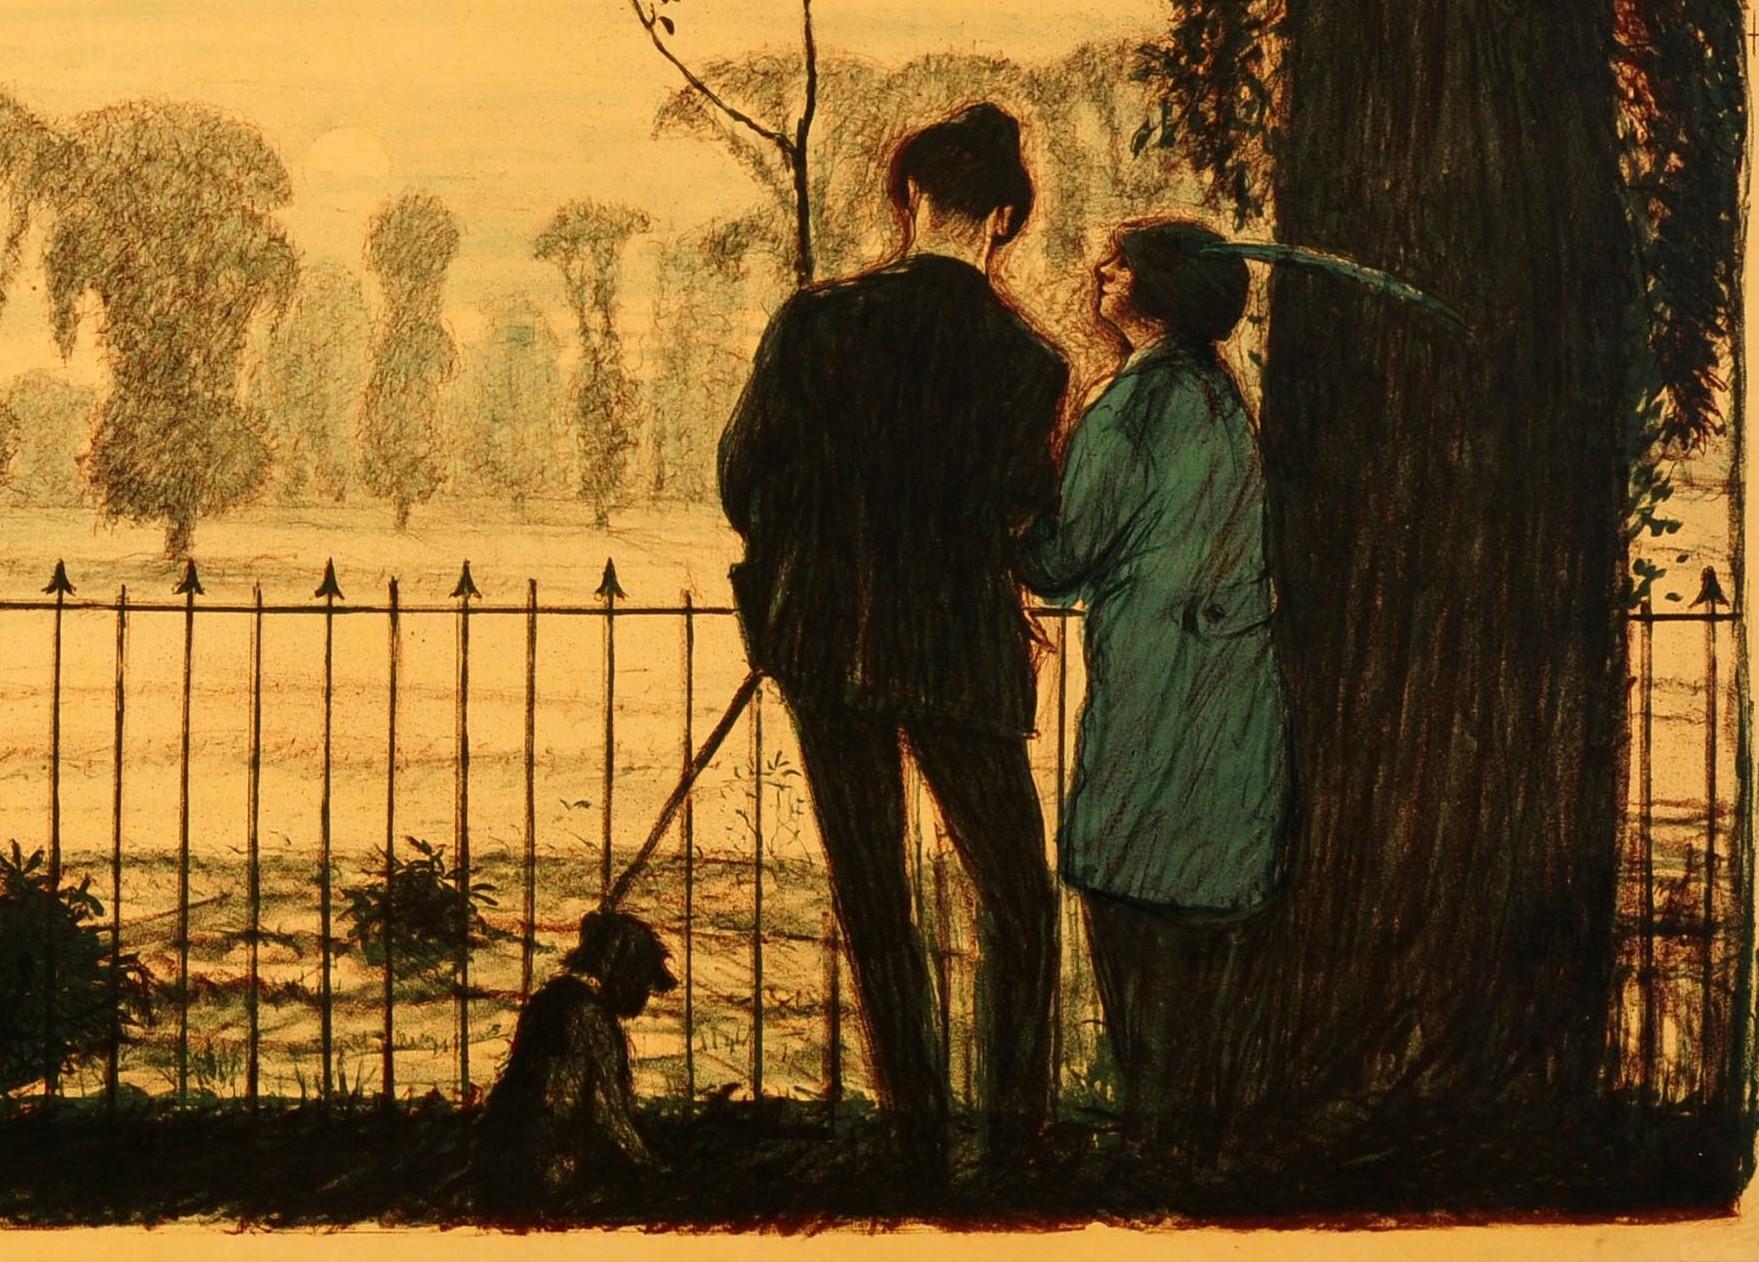 Original early London Underground Electric Railway poster featuring a scenic summer evening view by the Scottish painter and lithographer Archibald Standish Hartrick (1864-1950) of a park with a couple holding their dog on a leash and standing next